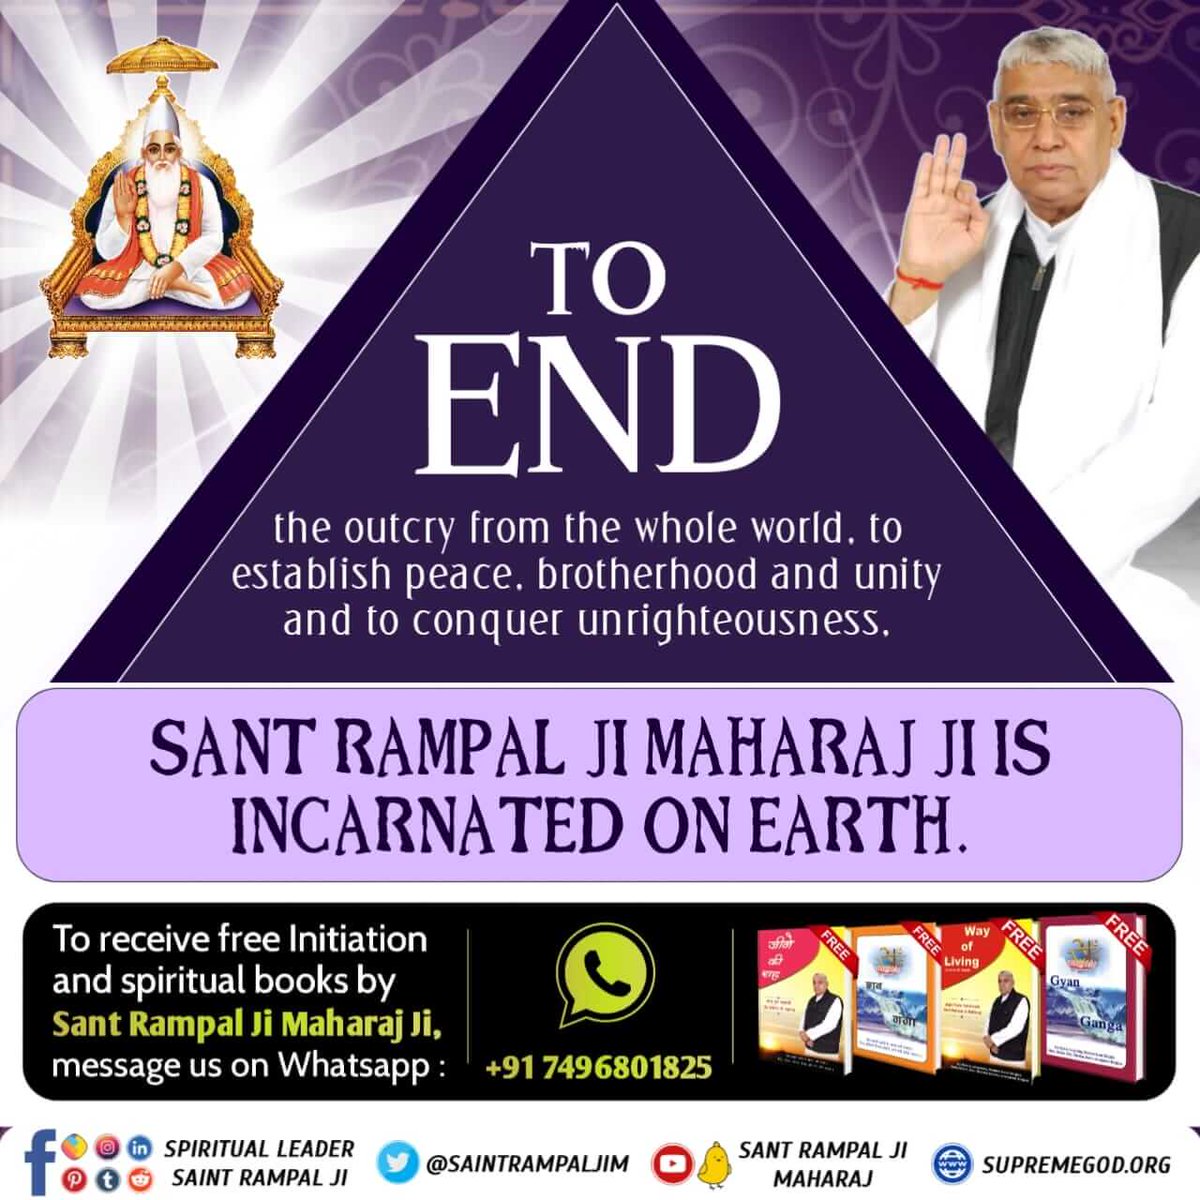 #धरती_को_स्वर्ग_बनाना_है

Sant Rampal Ji Maharaj has given the mantra for the complete eradication of the dowry evil through the book

'DHARTI UPAR SWARG'.
Sant Rampal Ji Maharaj
#GodMorningTuesday
#TuesdayMotivaton